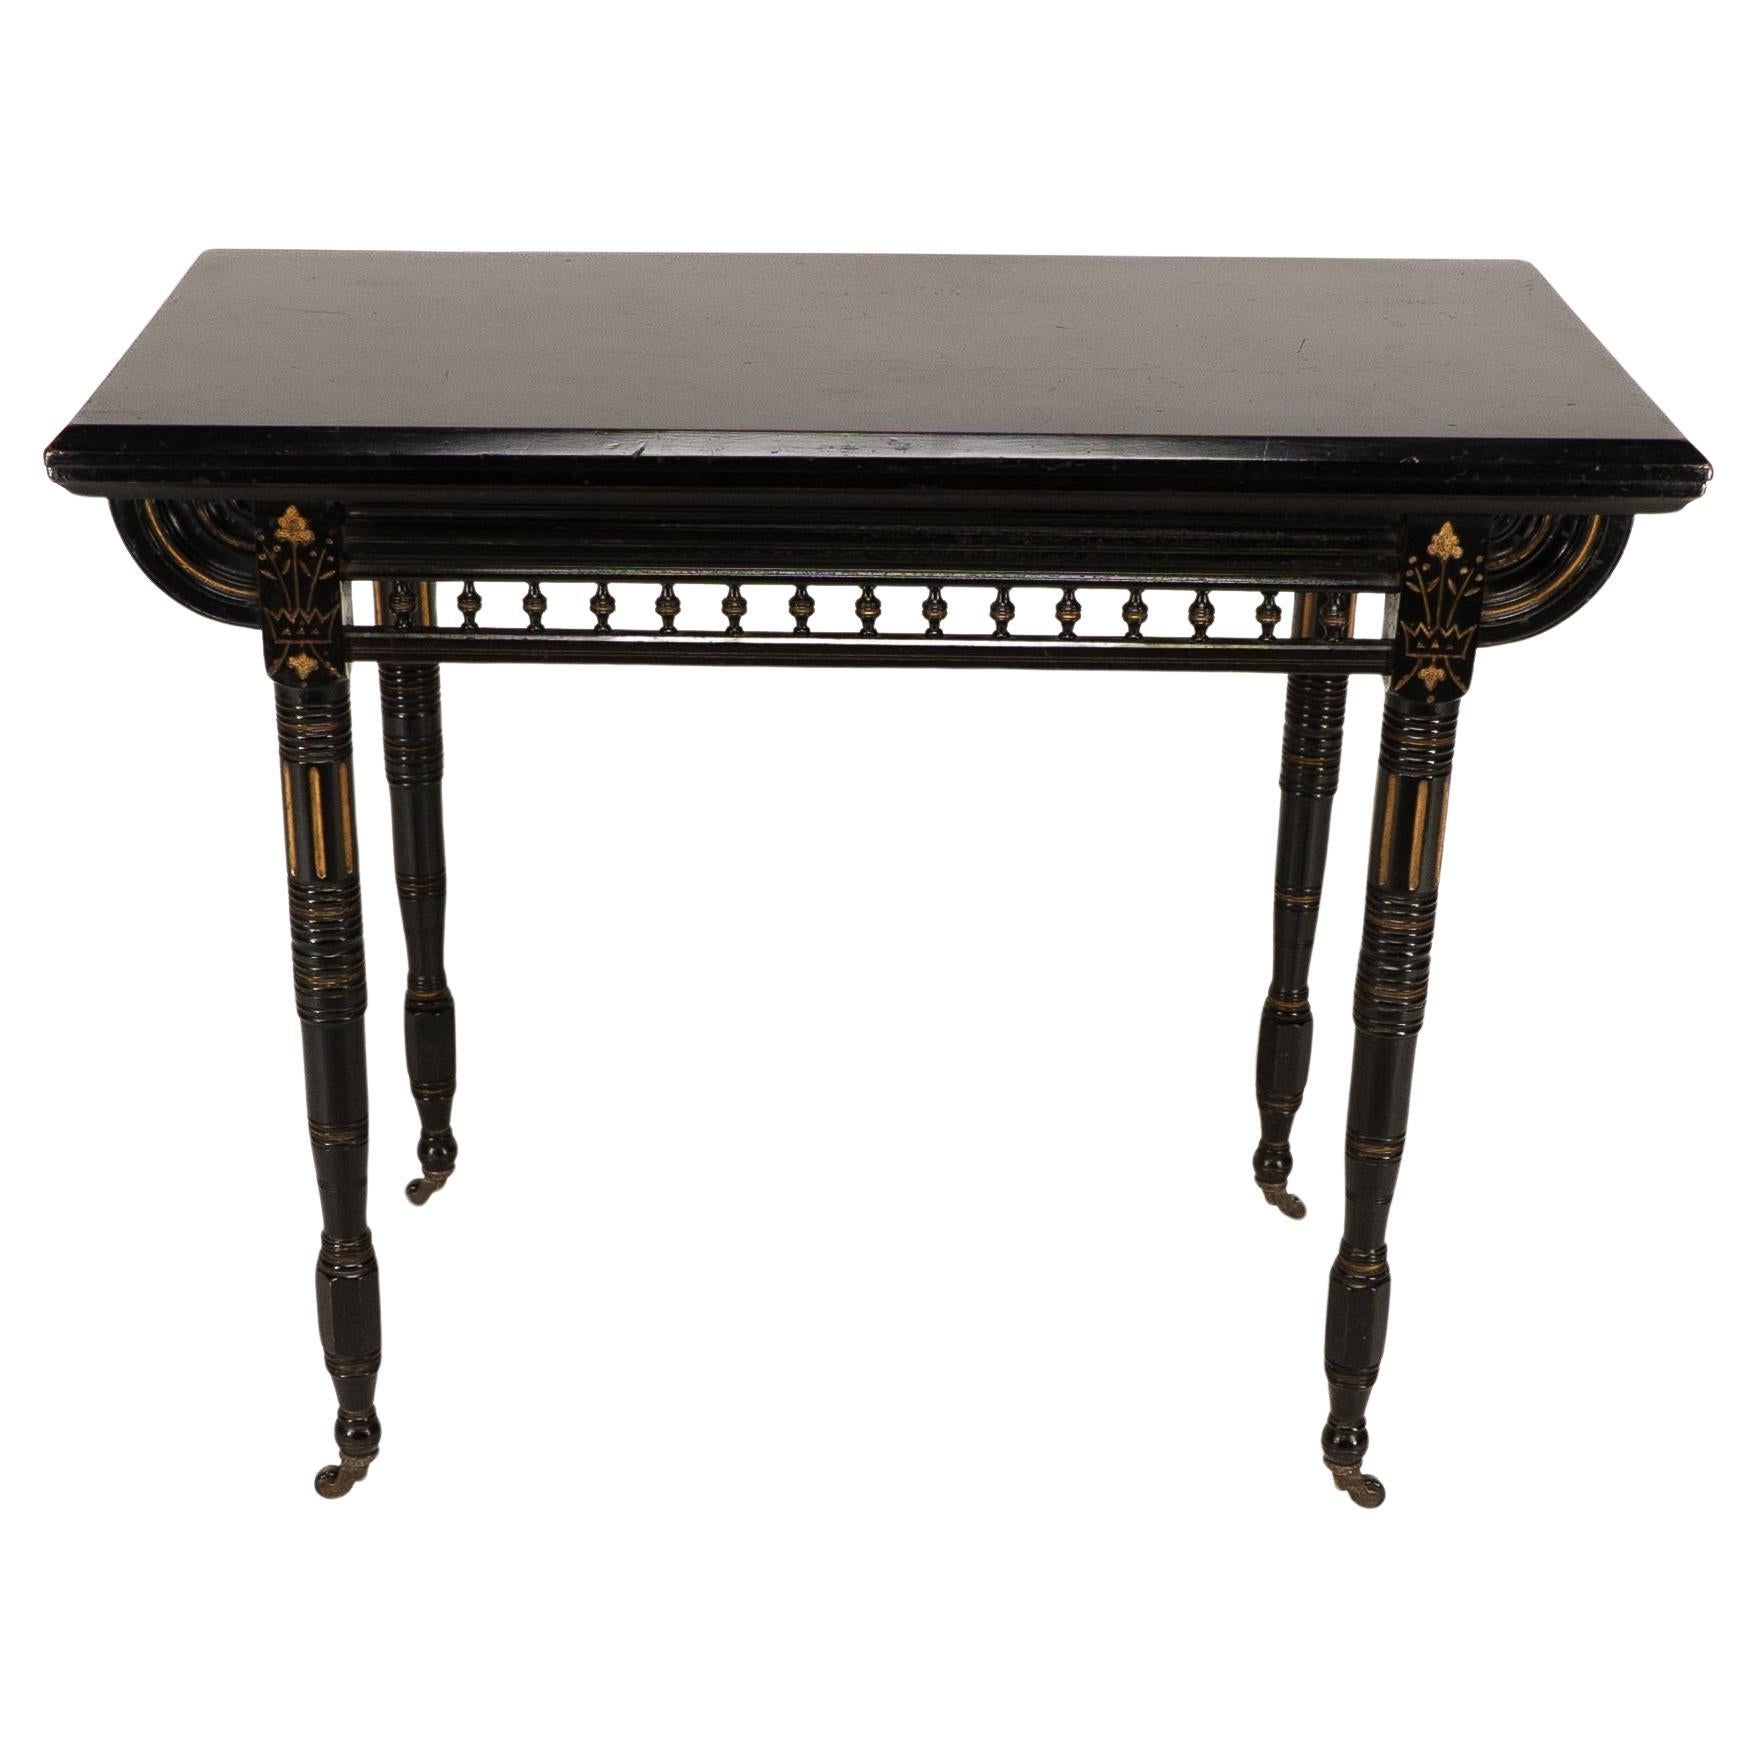 Gillows attributed. An Aesthetic Movement ebonized games and card table with deeply incised and gilded crown and floral decoration to the apron with a turned gallery below to each side. The top swivels and opens to reveal a storage area for games